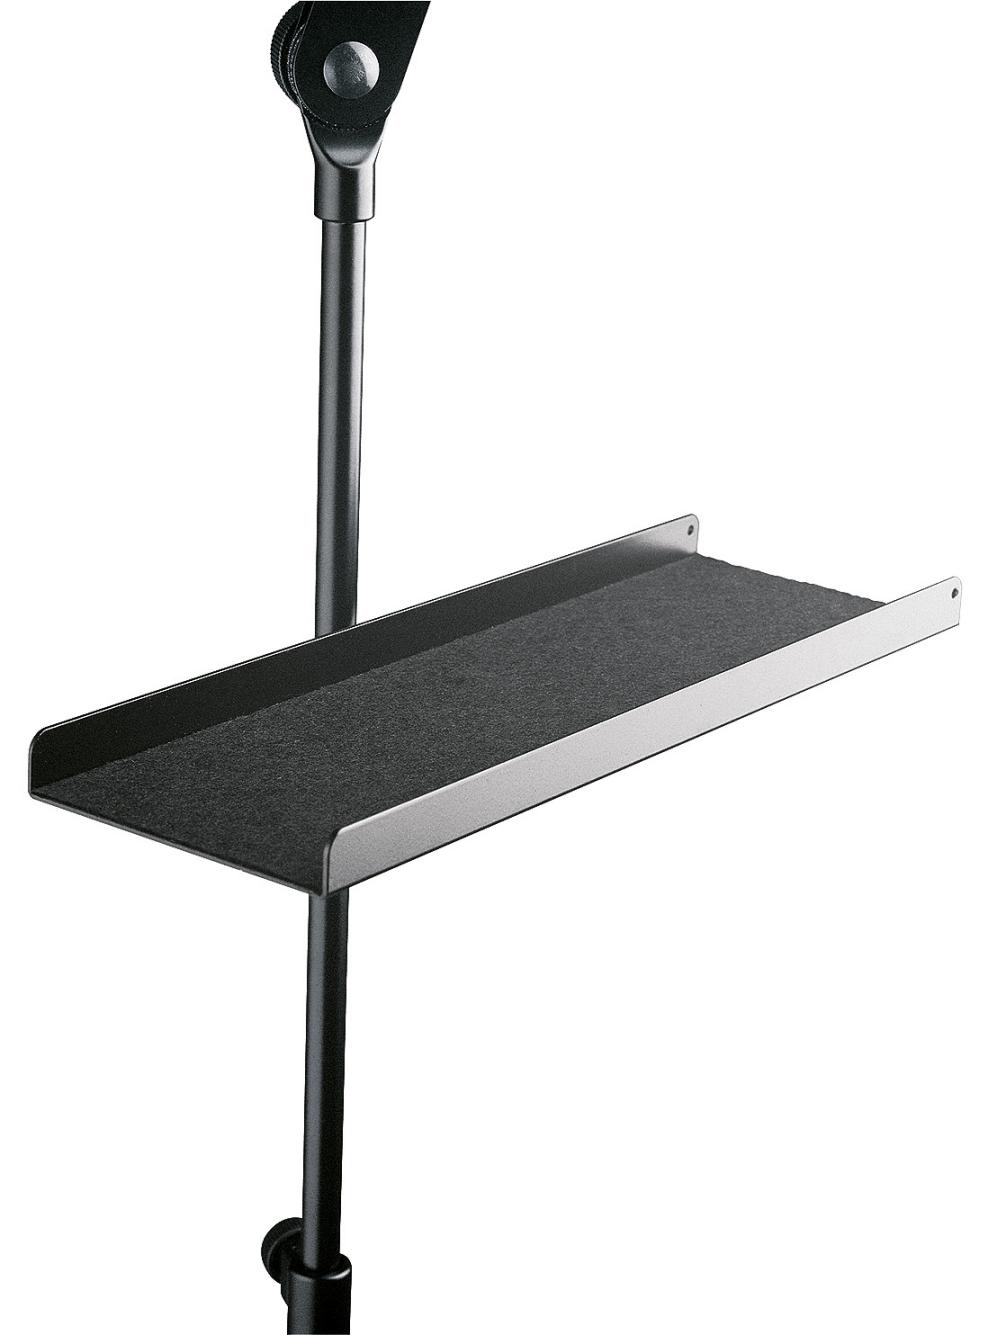 An image of K&M Music Stand Tray Black